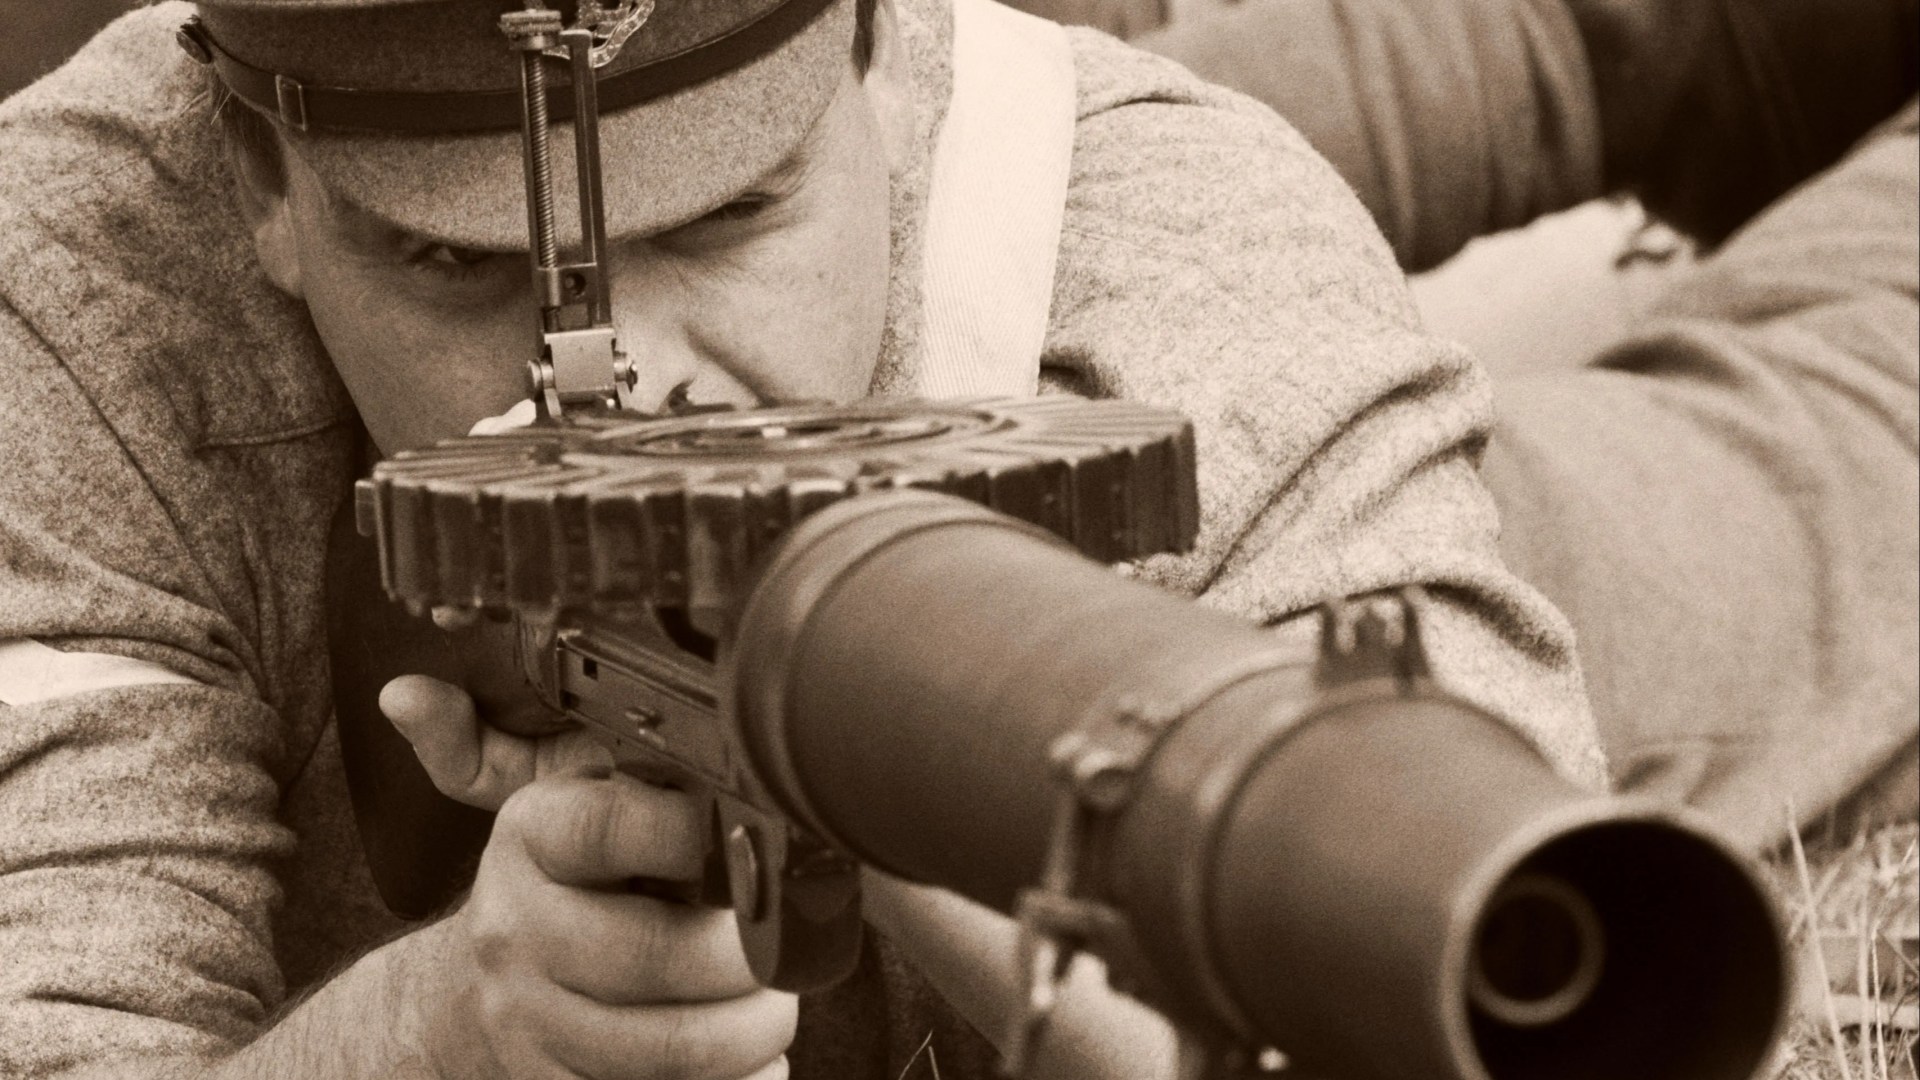 Urgent hunt launched for 100-year-old machine gun after it was STOLEN from army HQ